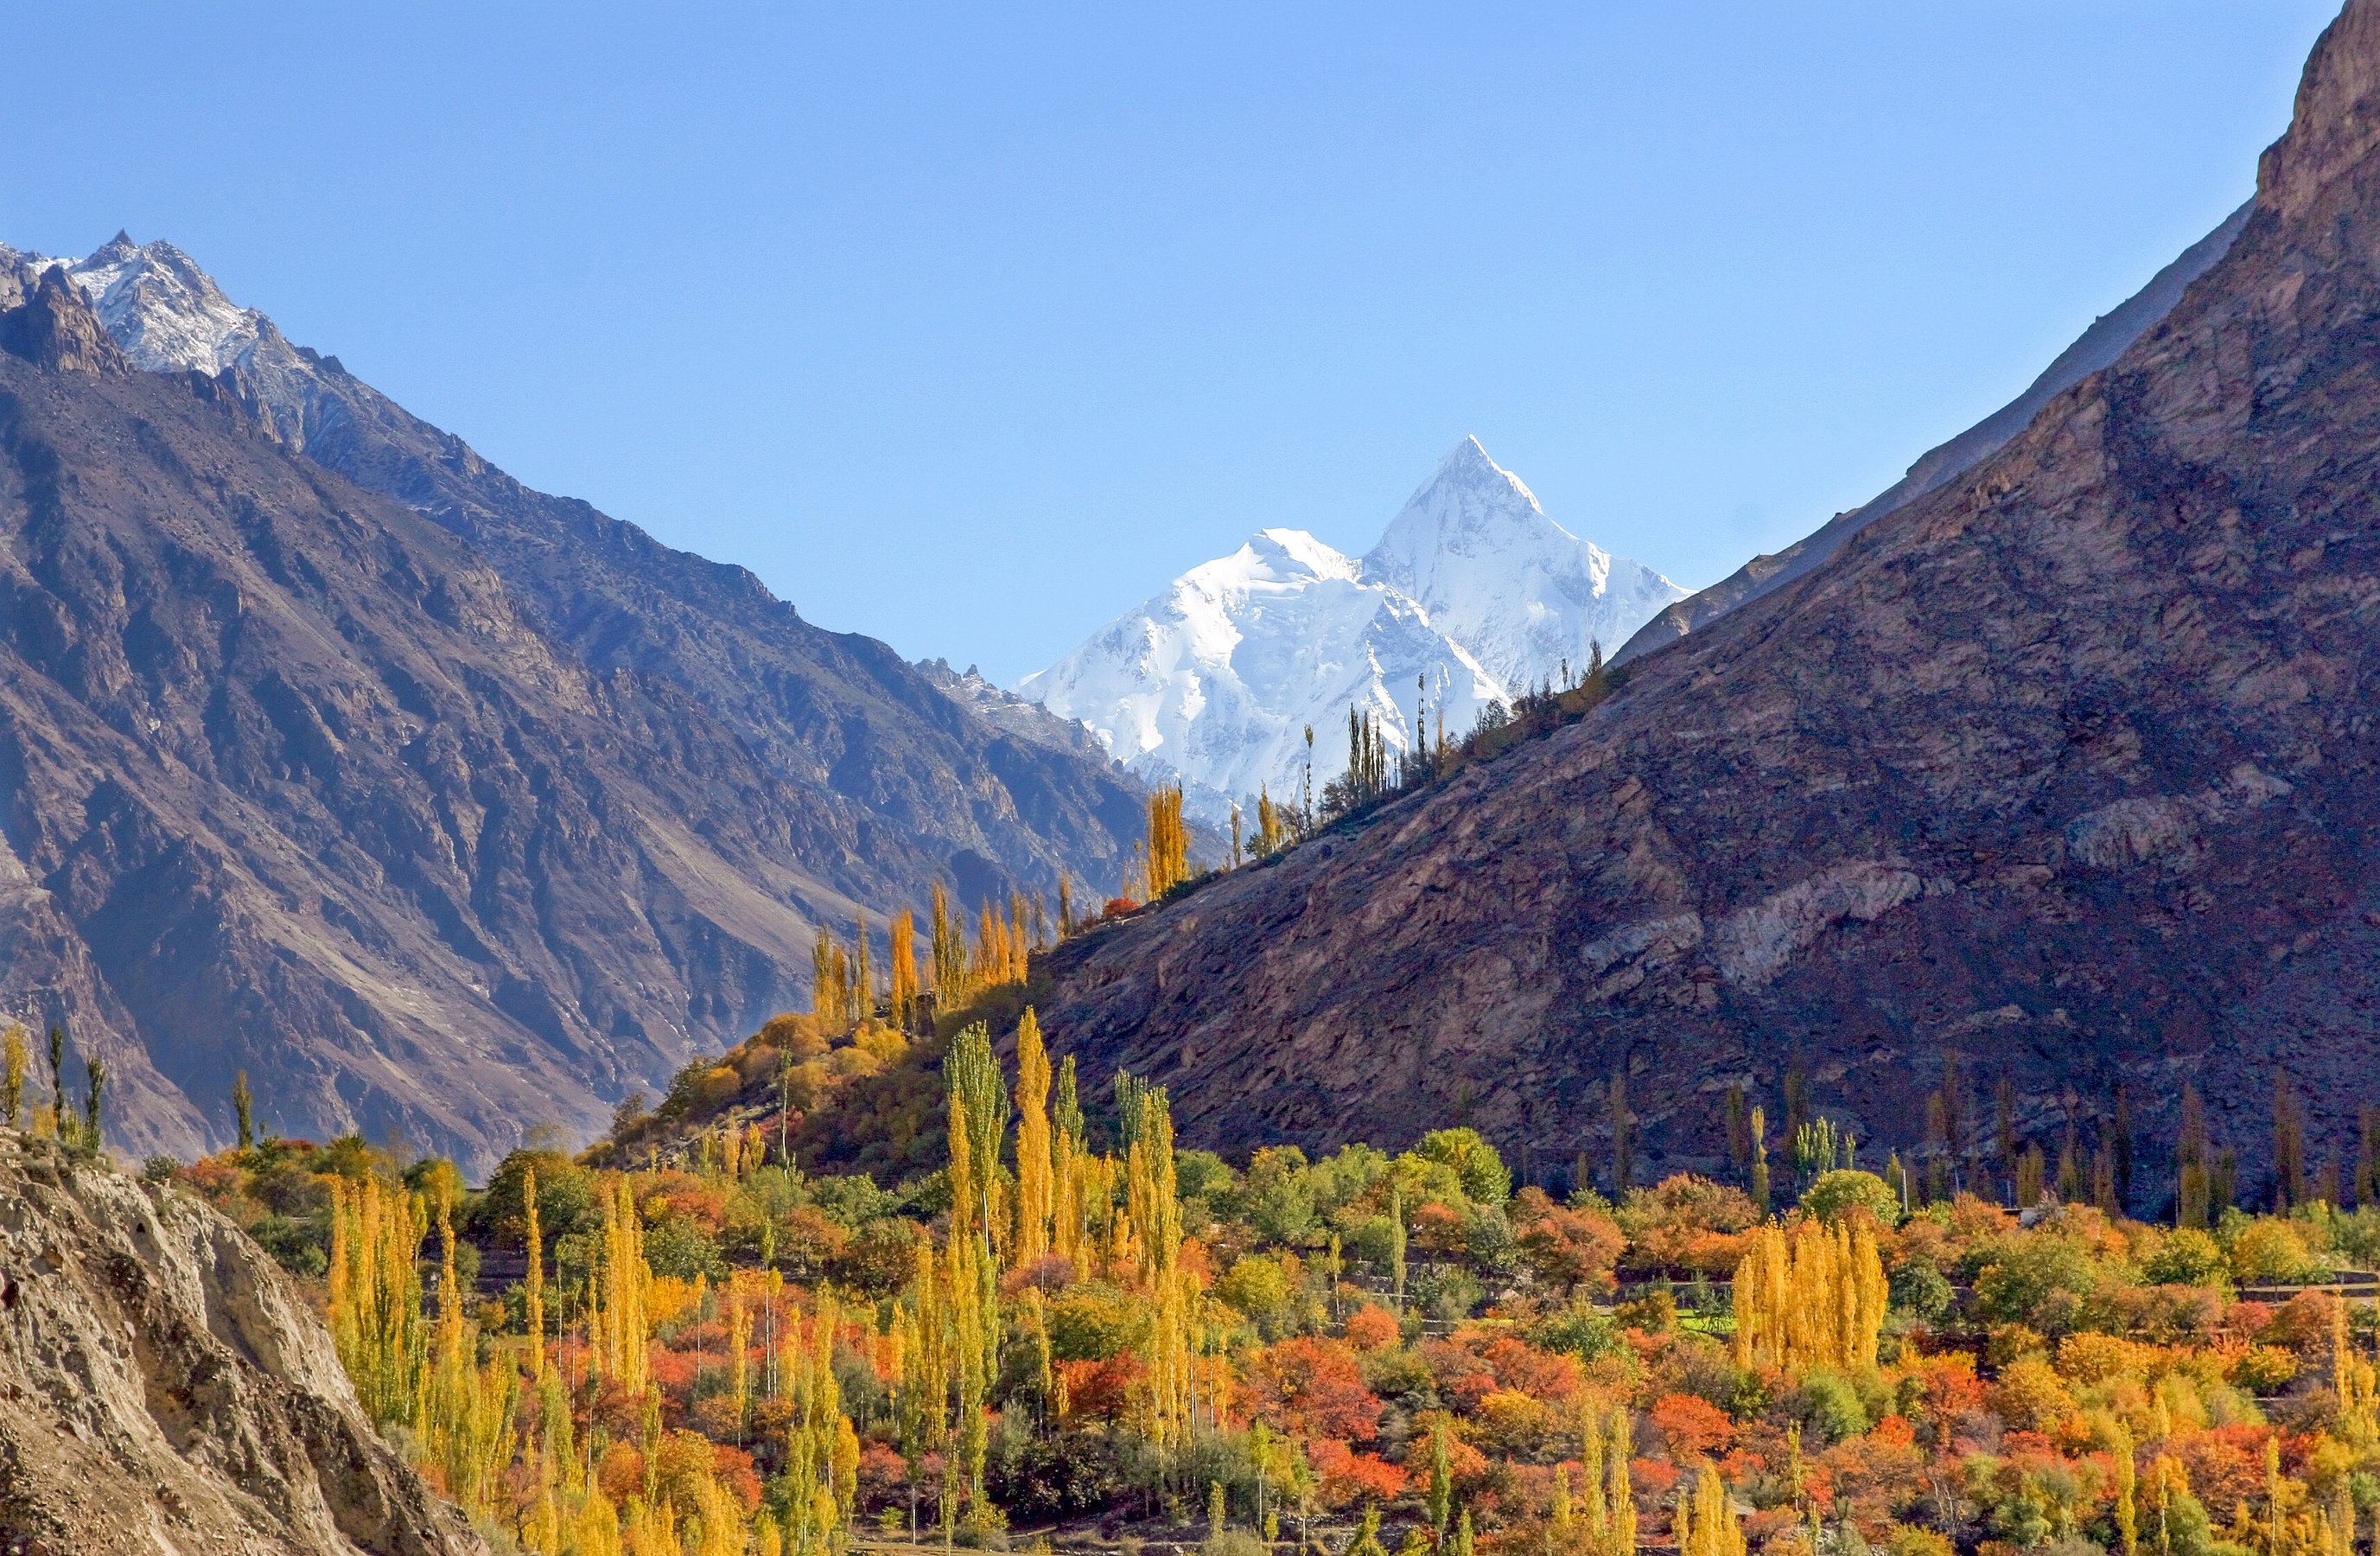 "Autumn_color_in_Hunza_Valley.jpg" by User:Ghazi Ghulamraza